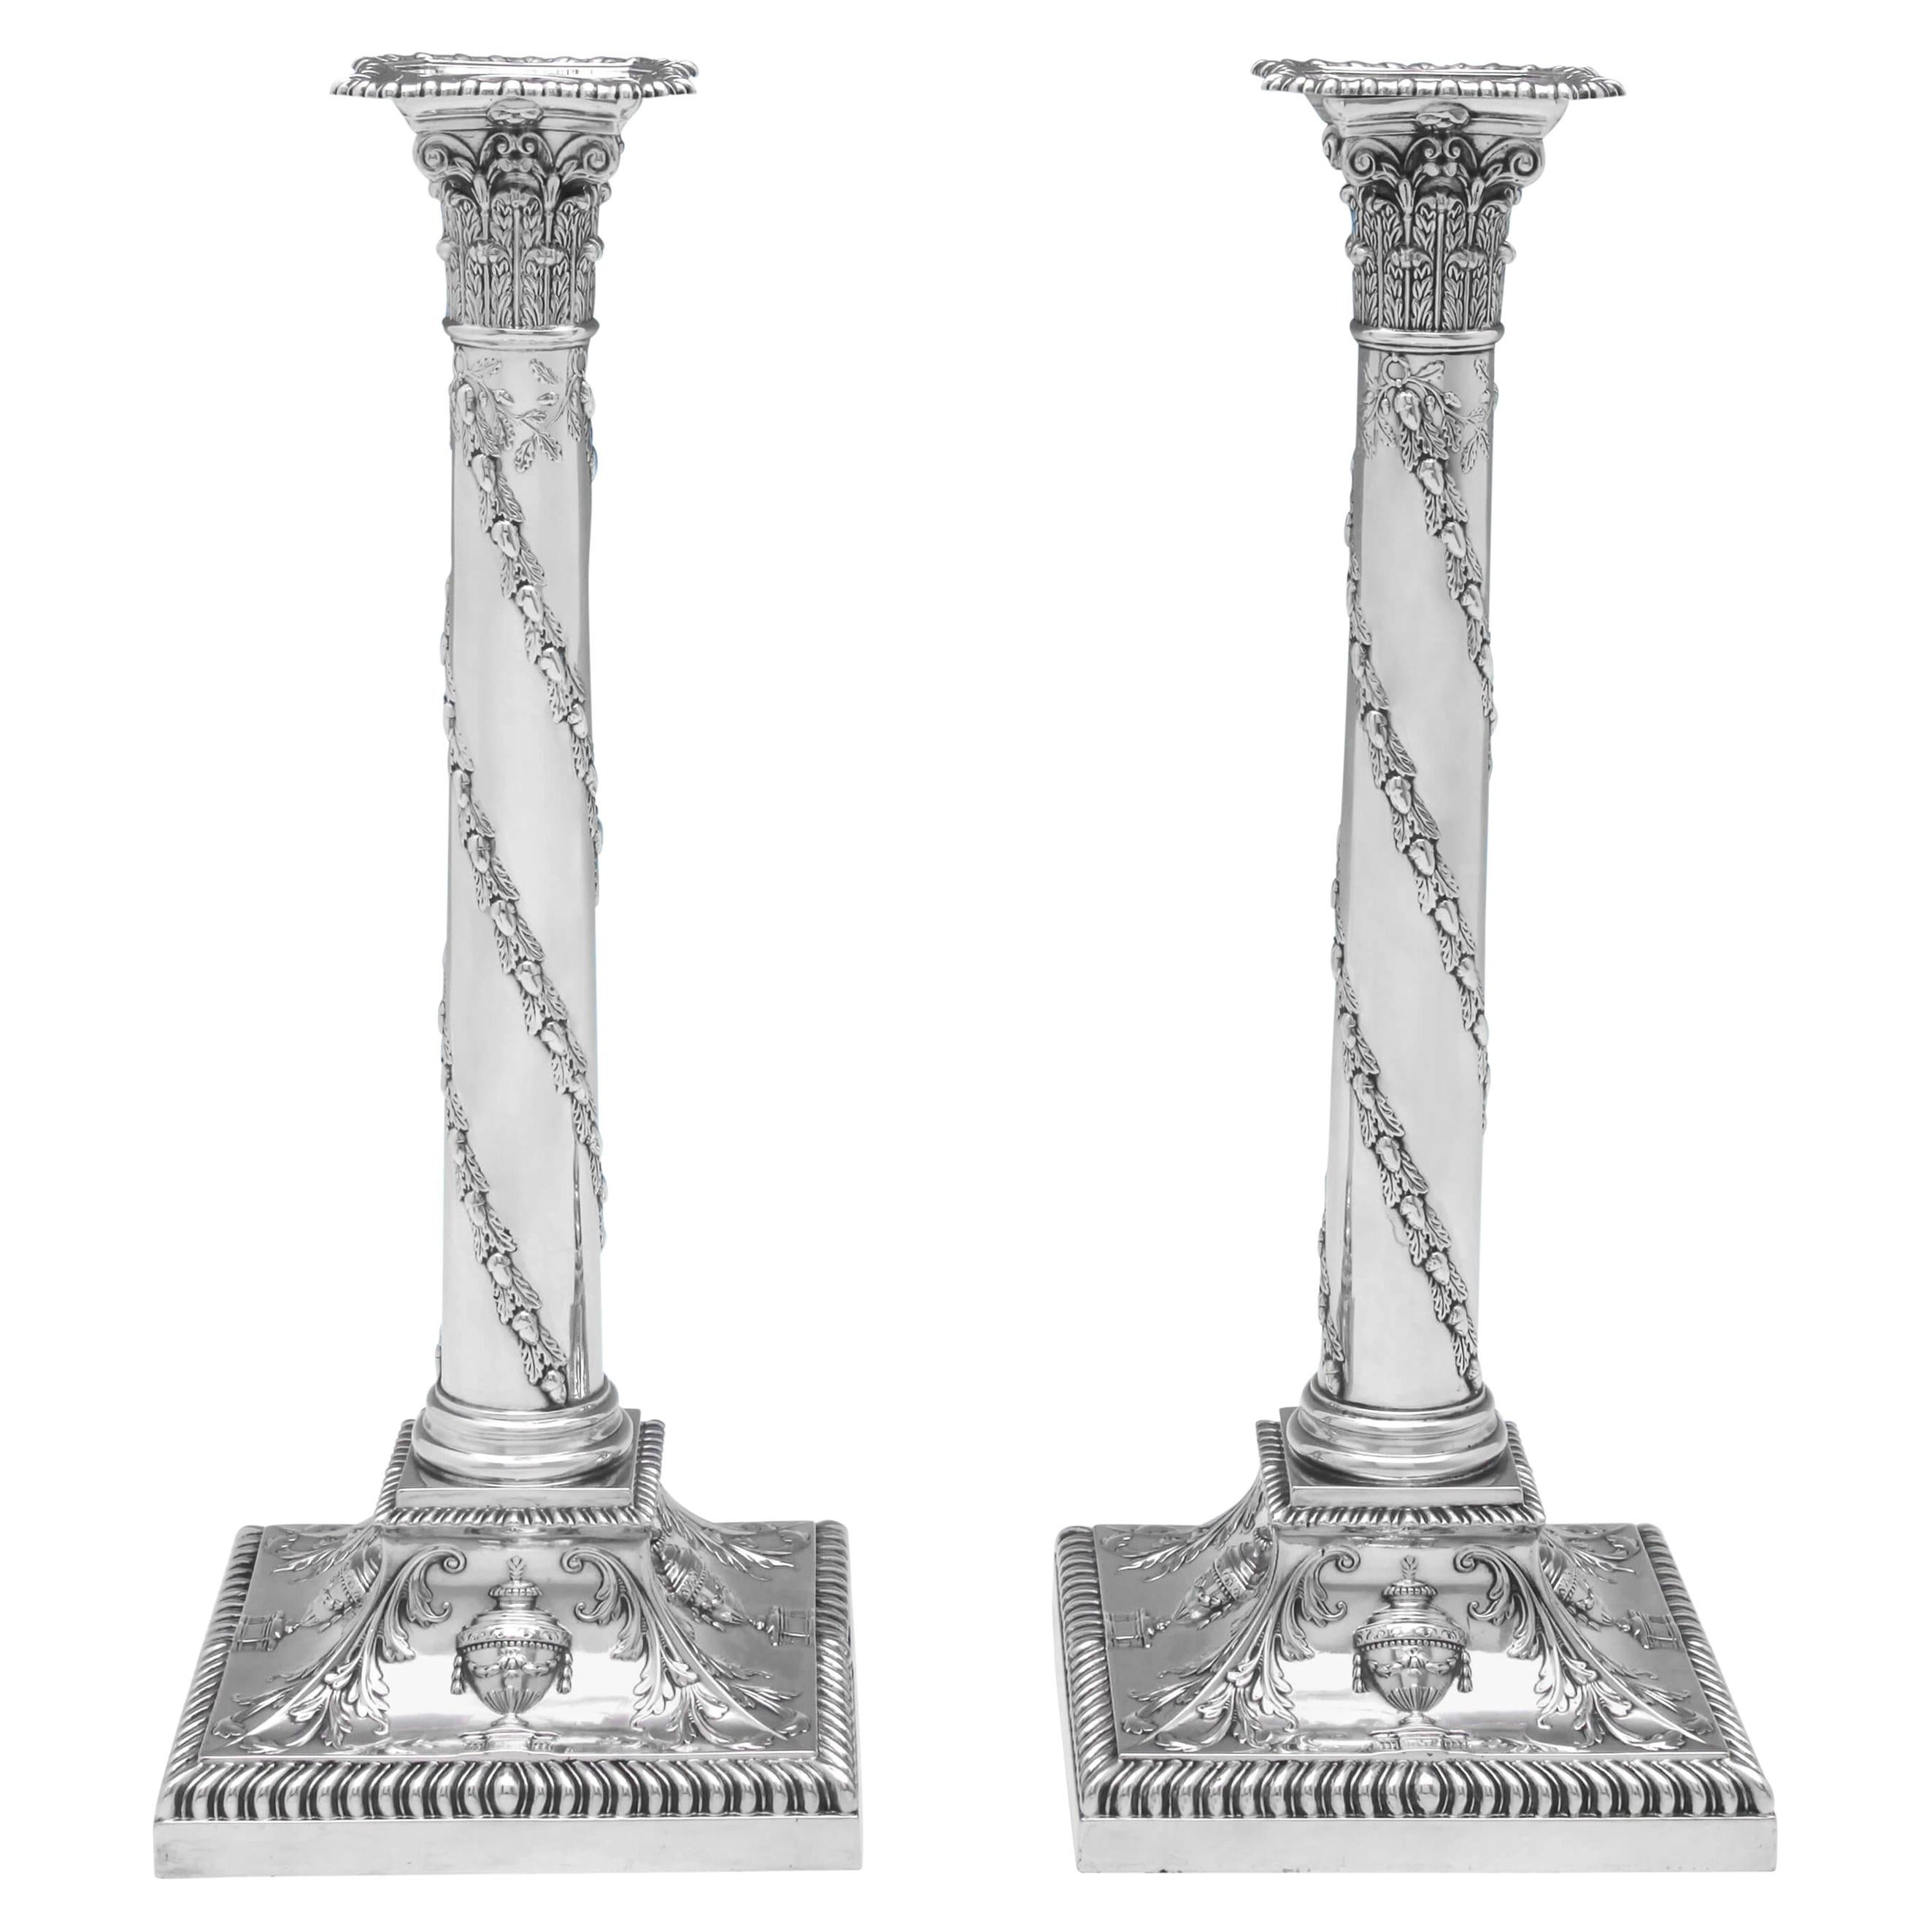 Neoclassical Revival Pair of Victorian Antique Sterling Silver Candlesticks 